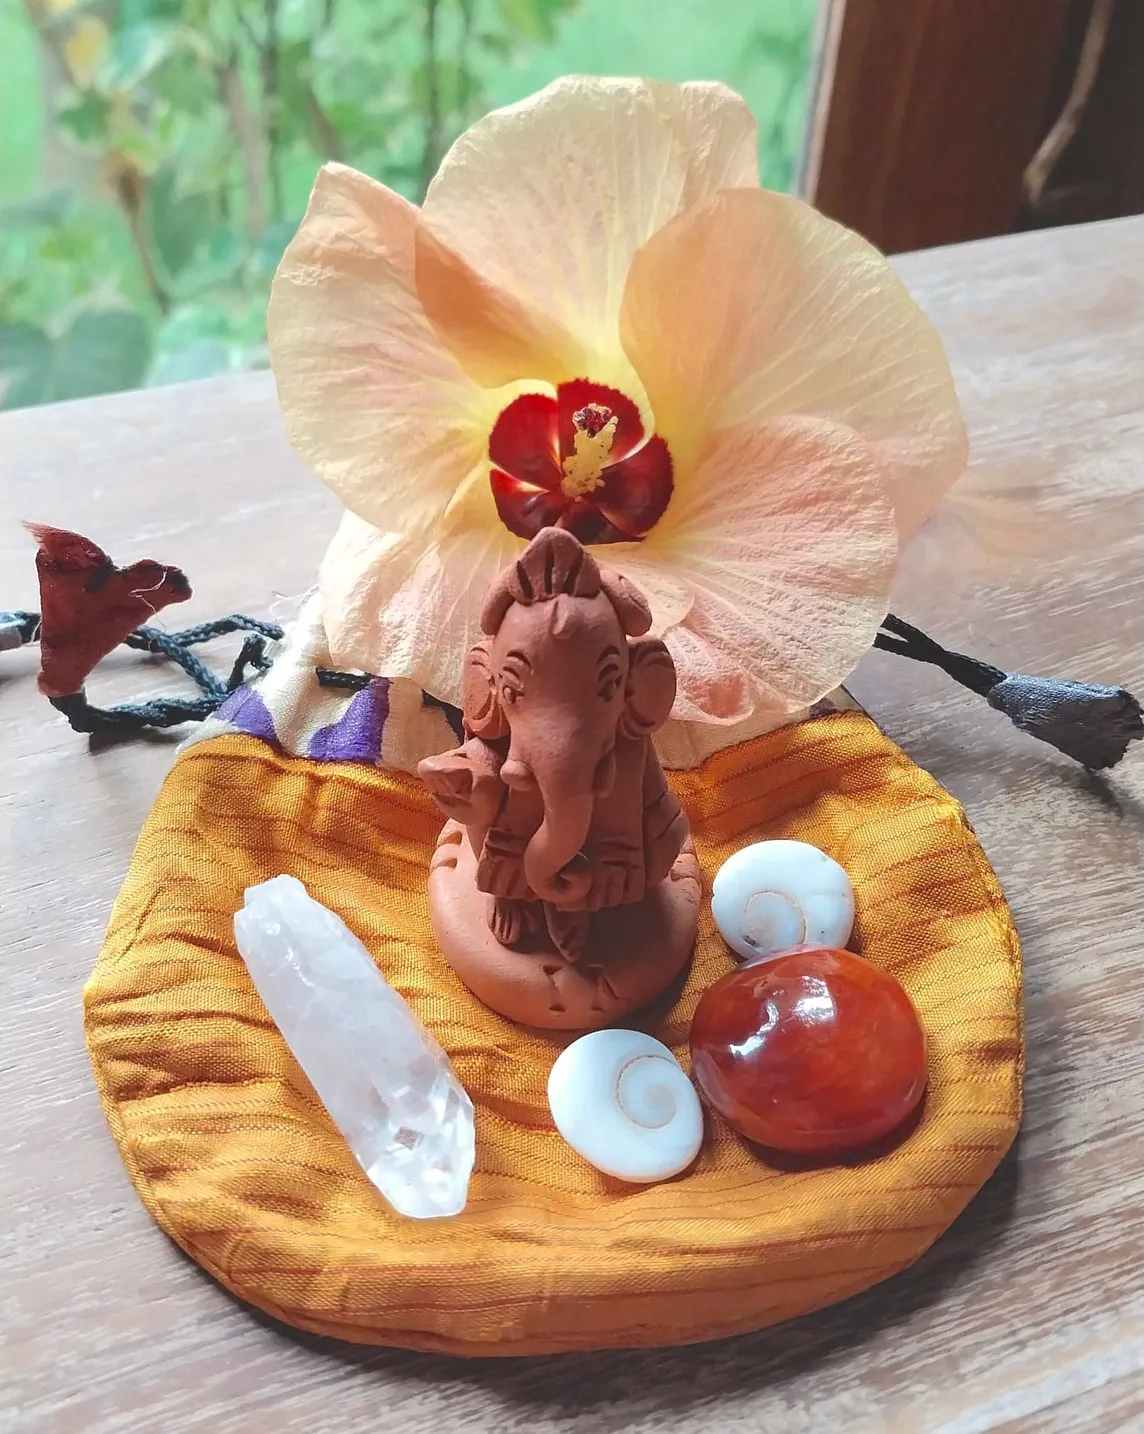 A travel altar with a clay figure of Ganesh, crystals and a big peach coloured tropical flower on a desk looking out onto a garden